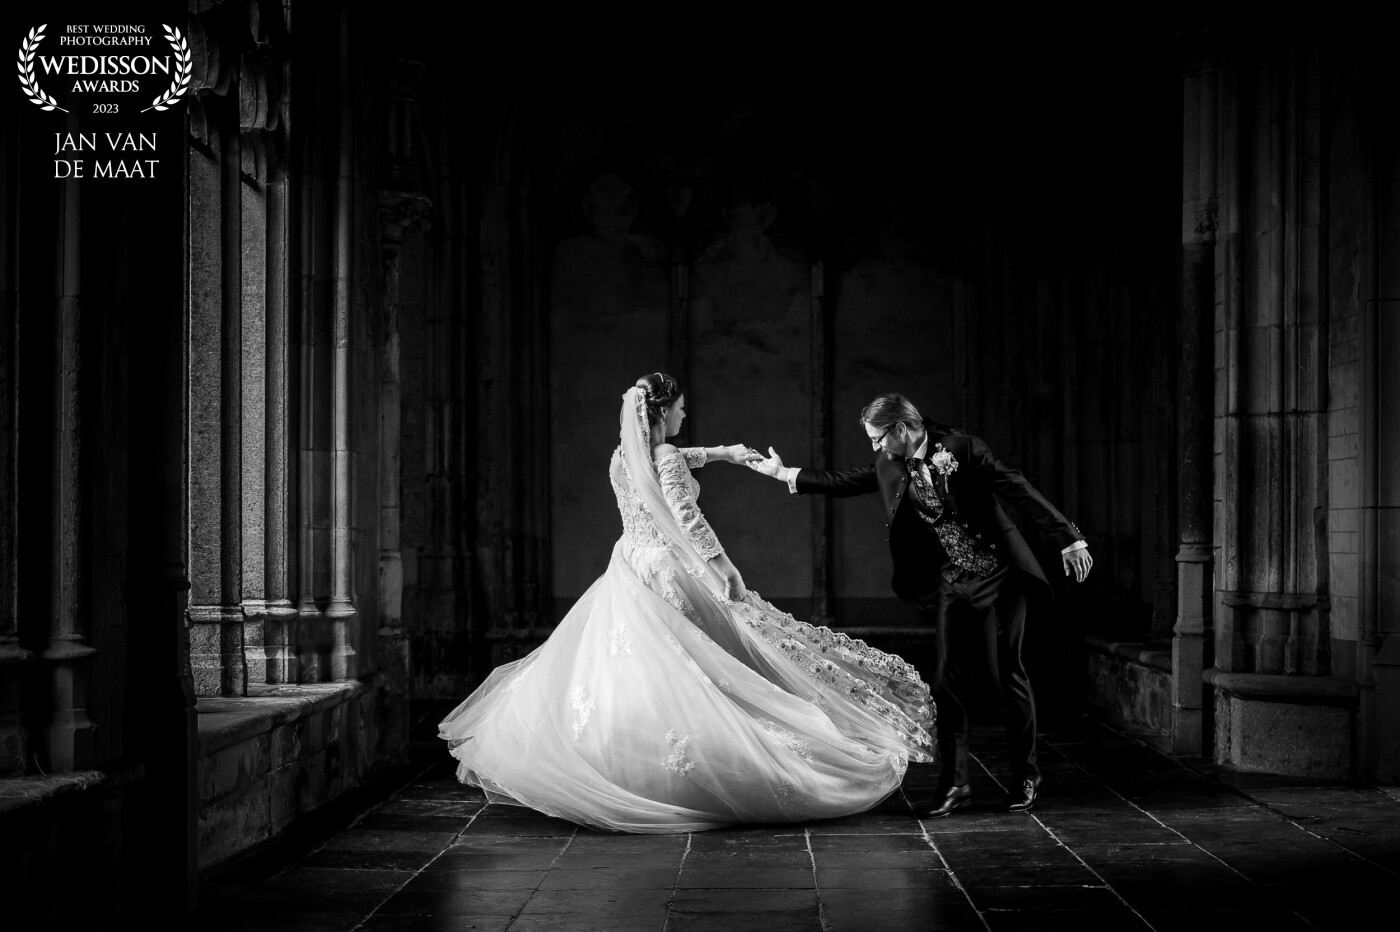 May I have this dance? I really love this classical style of bride and groom and this pose is exactly what I had in mind. Timeless and with motion.